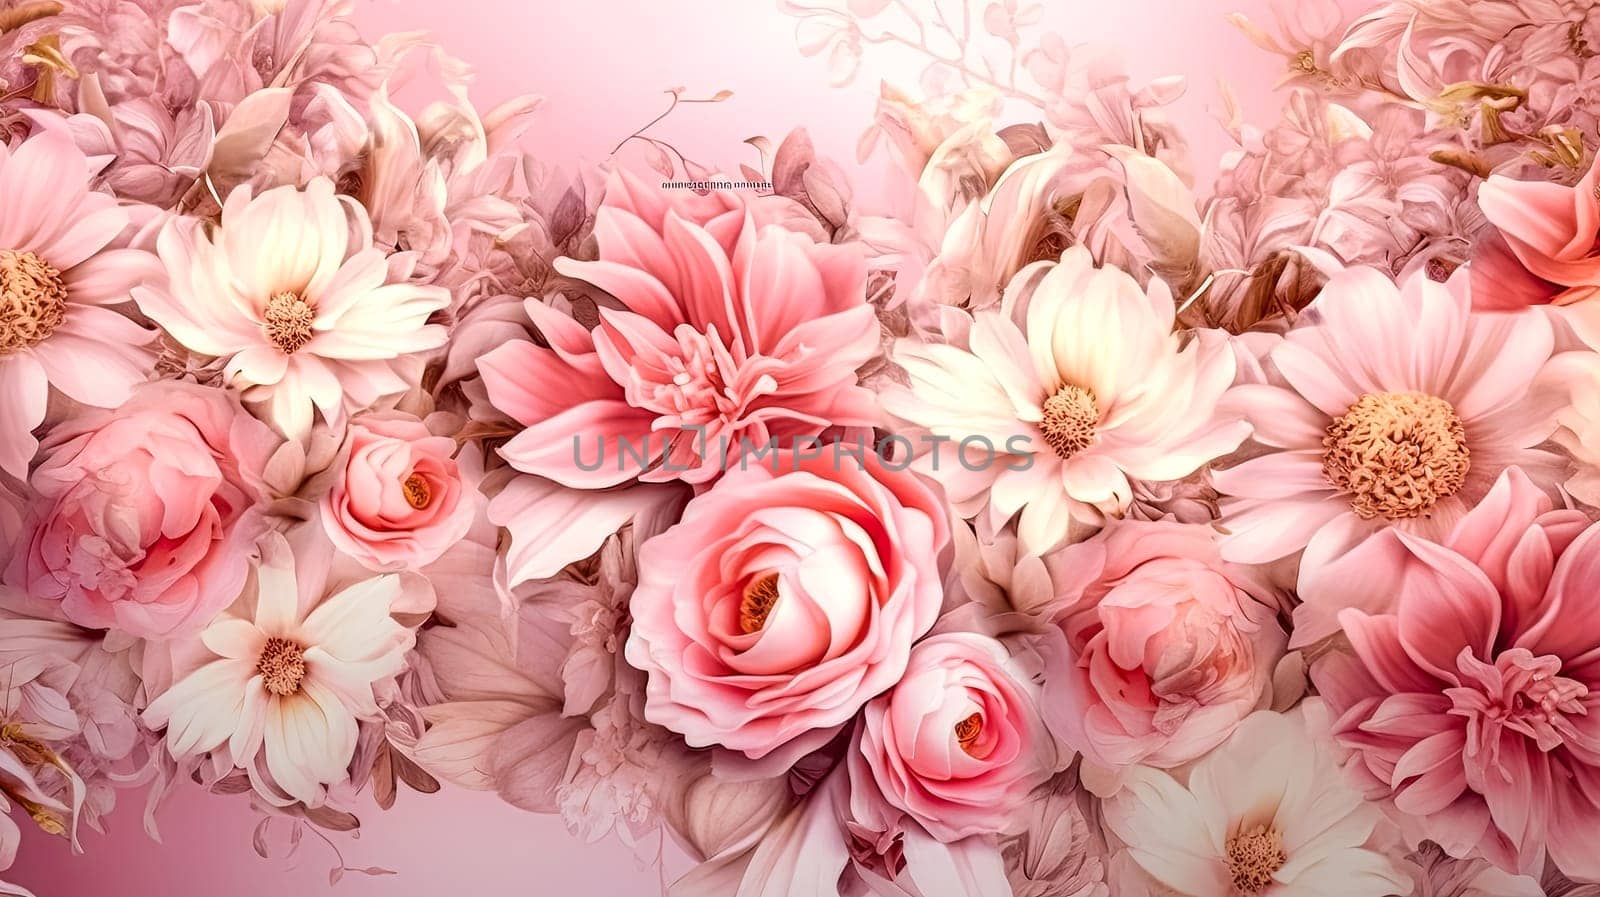 A colorful floral arrangement with pink and white flowers. The flowers are arranged in a way that creates a sense of movement and flow. Scene is one of beauty and serenity